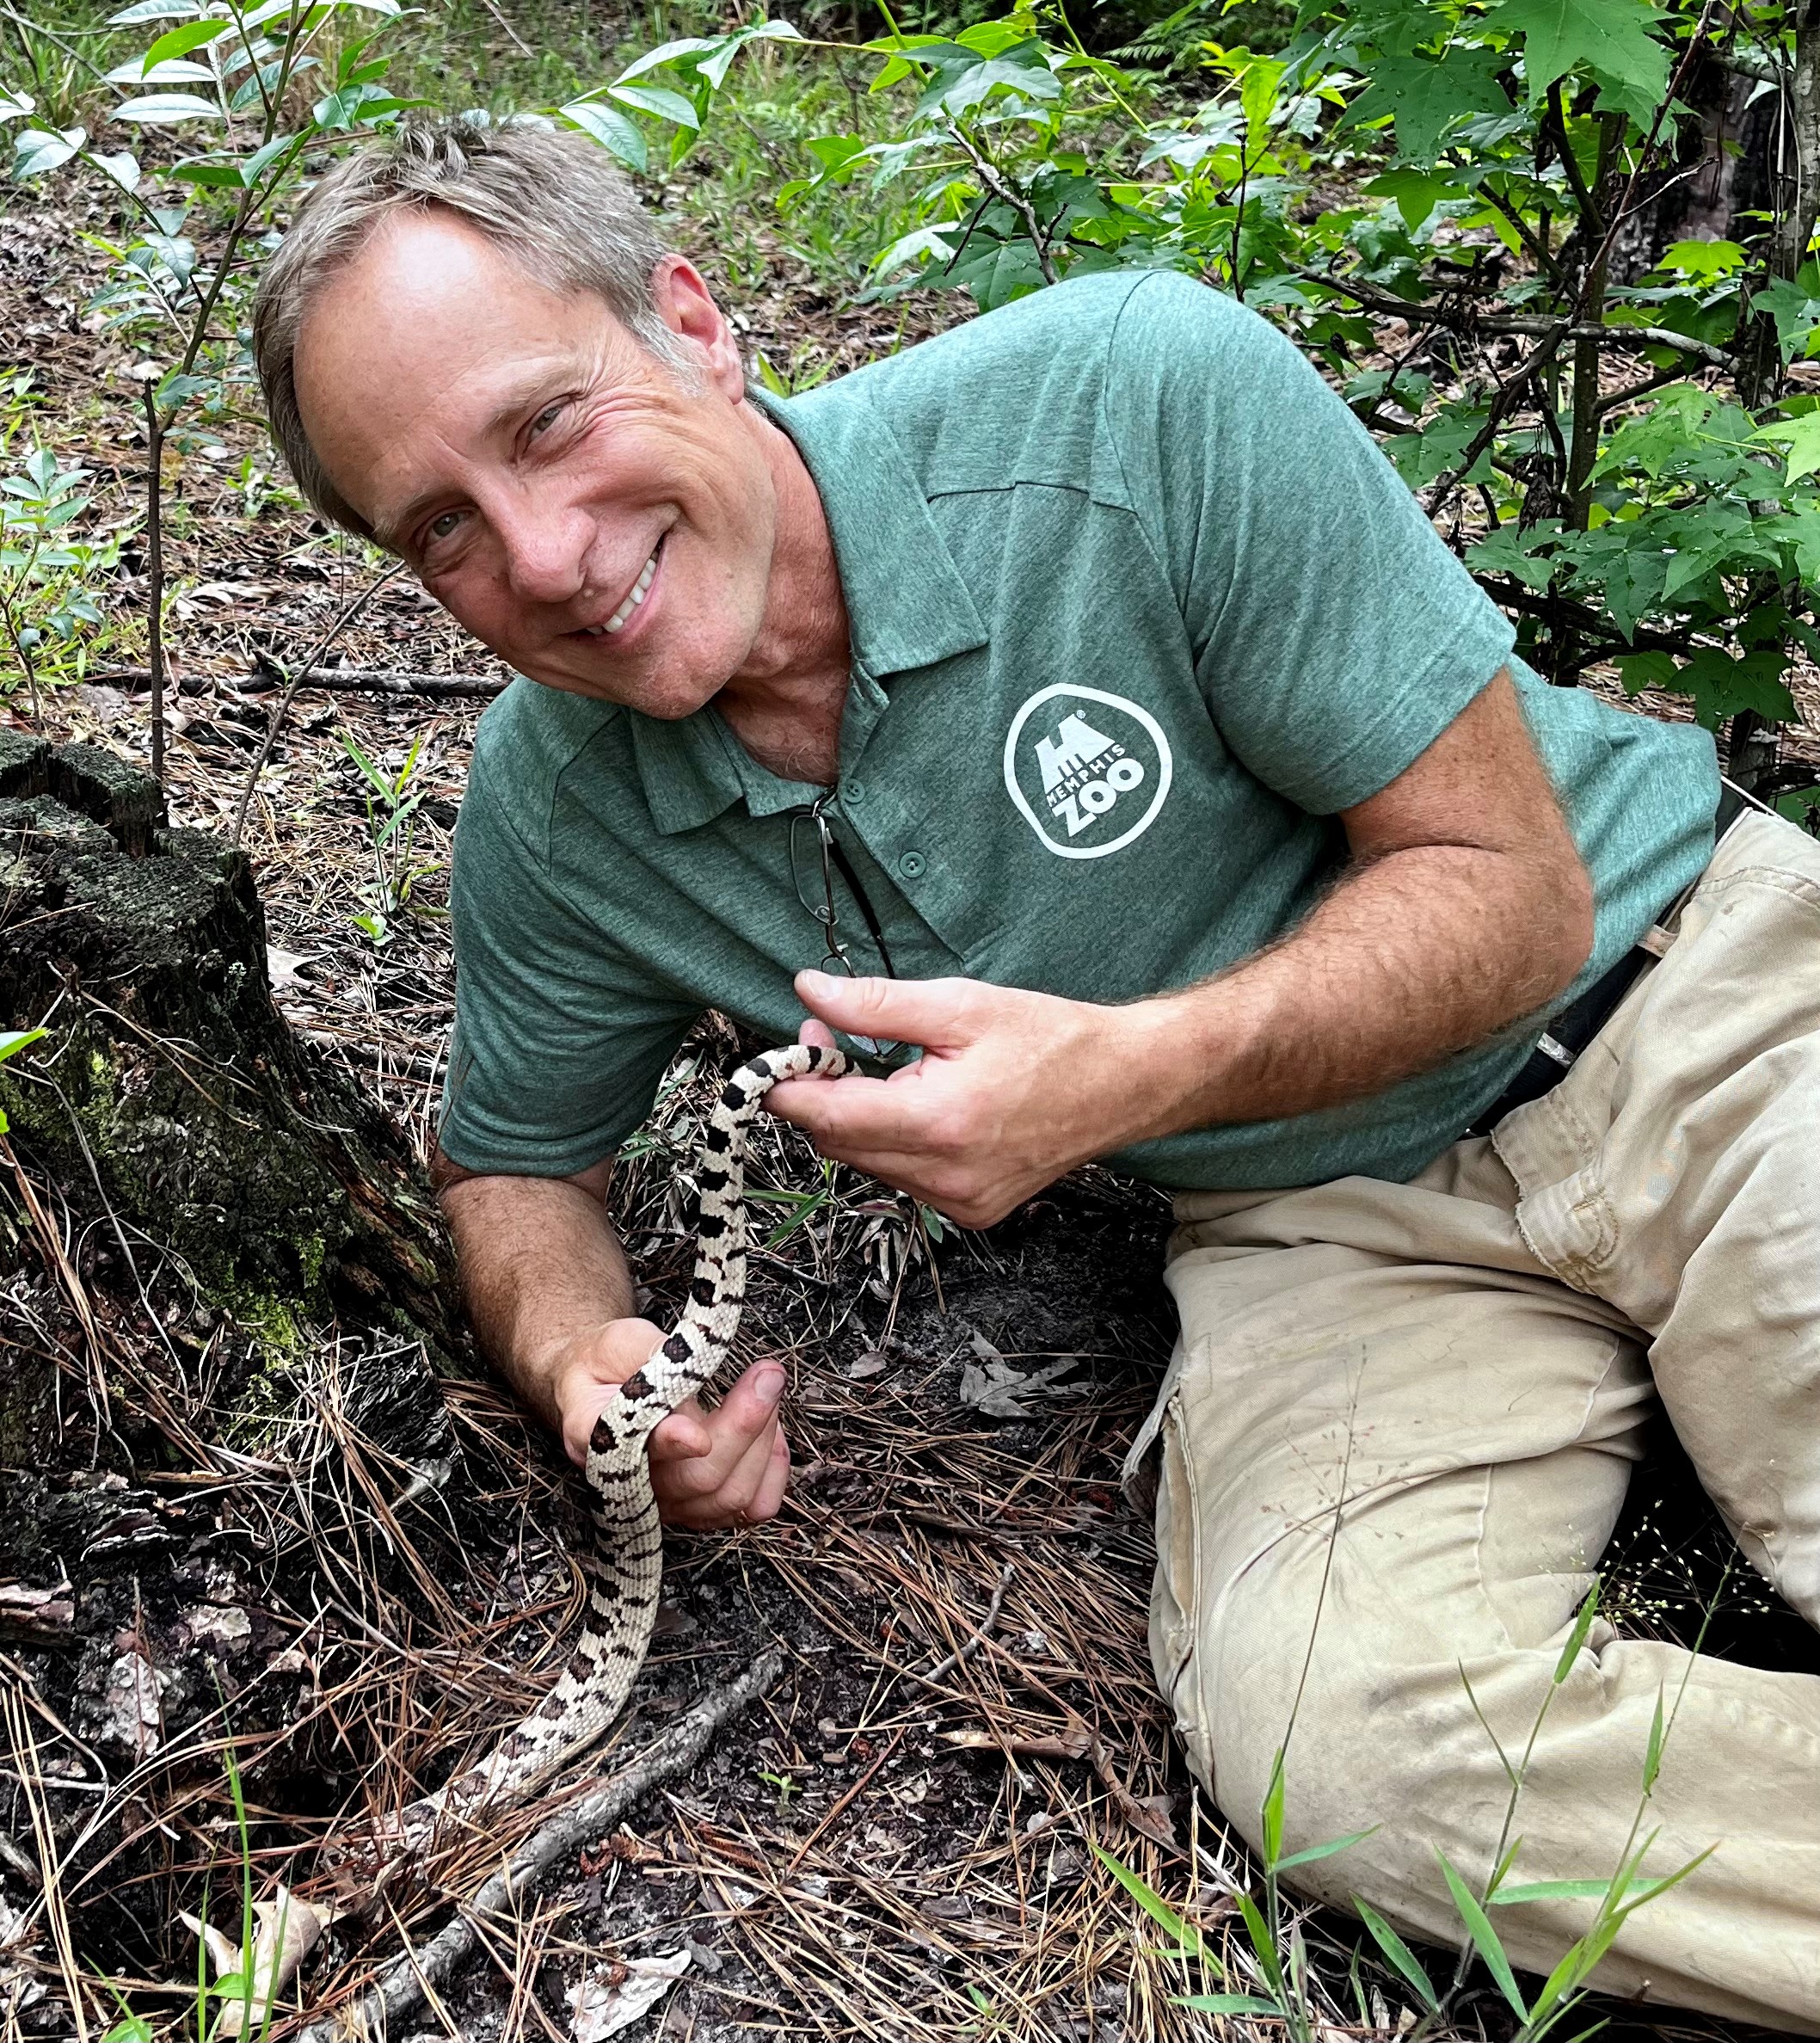 Dr. Reichling posing with snake in longleaf pine ecosystem